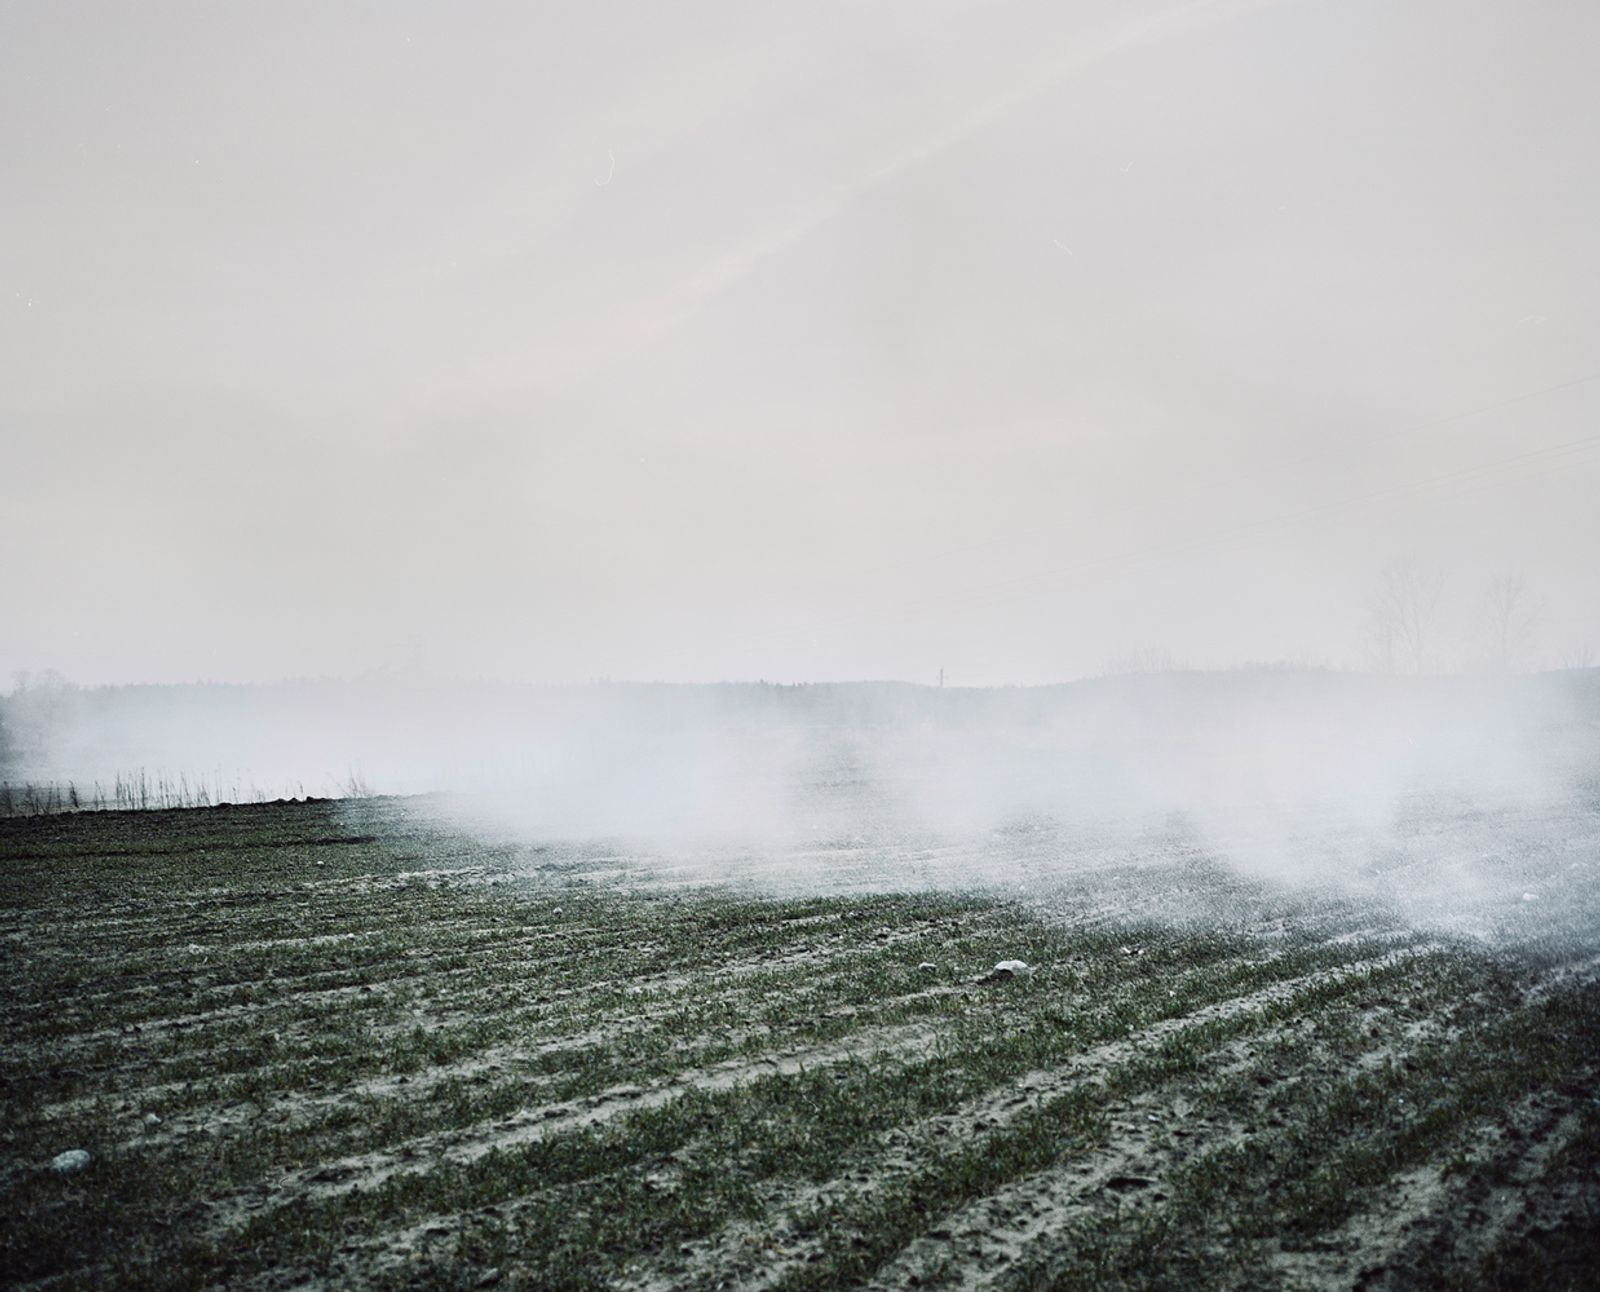 © Jasper  Bastian - Clouds of smoke from an old farm building burning down in Stalgonys.Stalgonys, Lithuania, 2015.